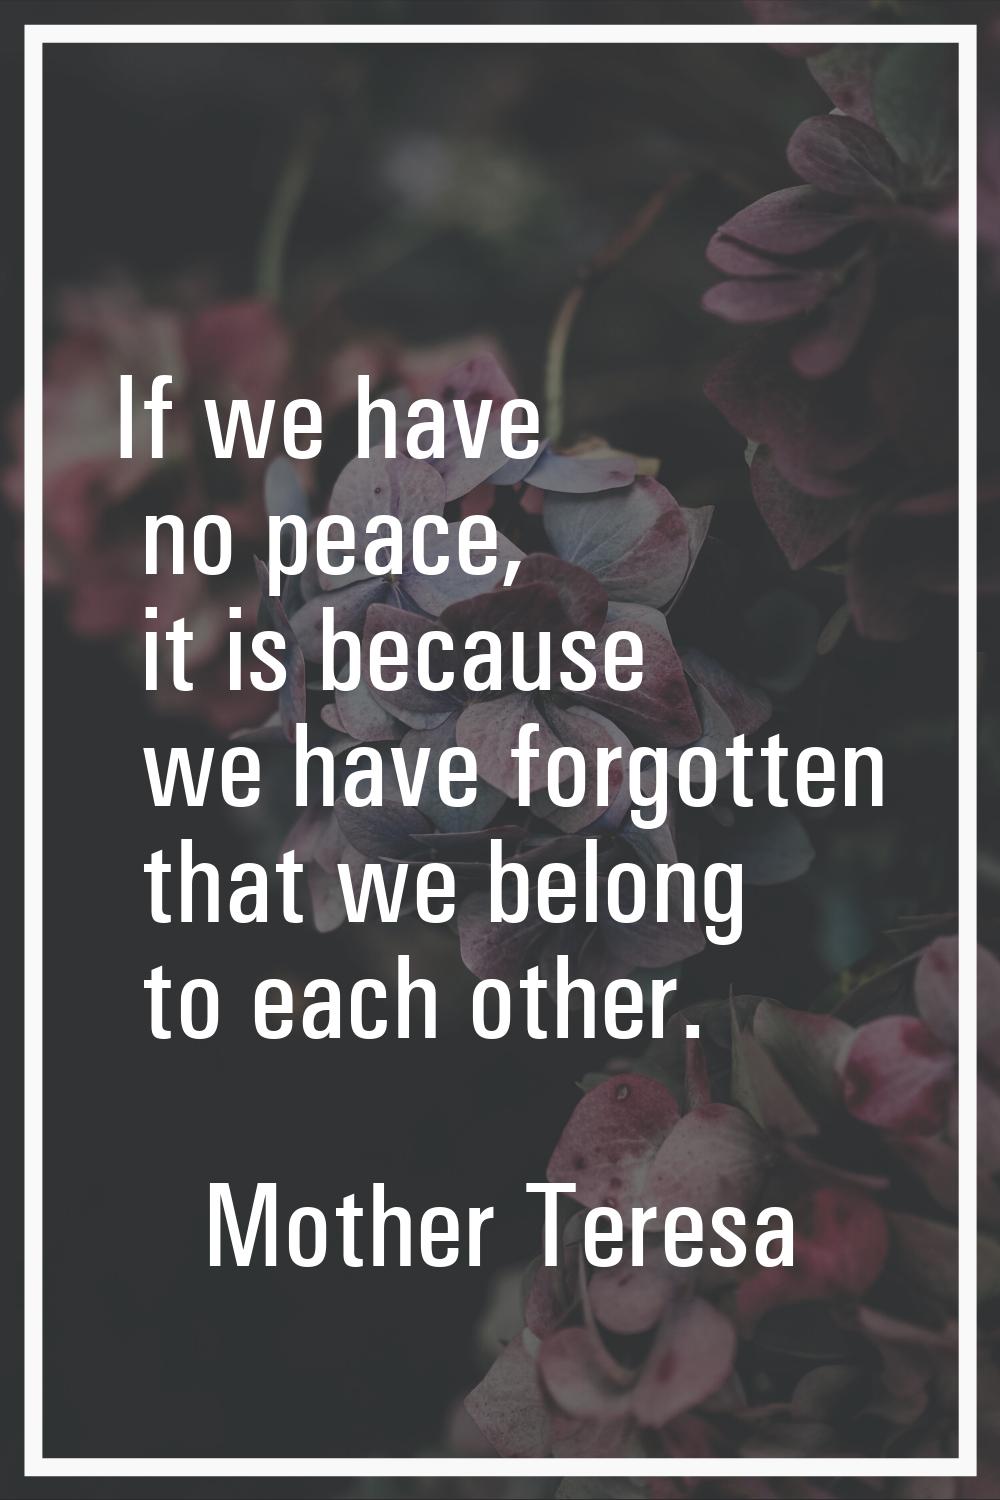 If we have no peace, it is because we have forgotten that we belong to each other.